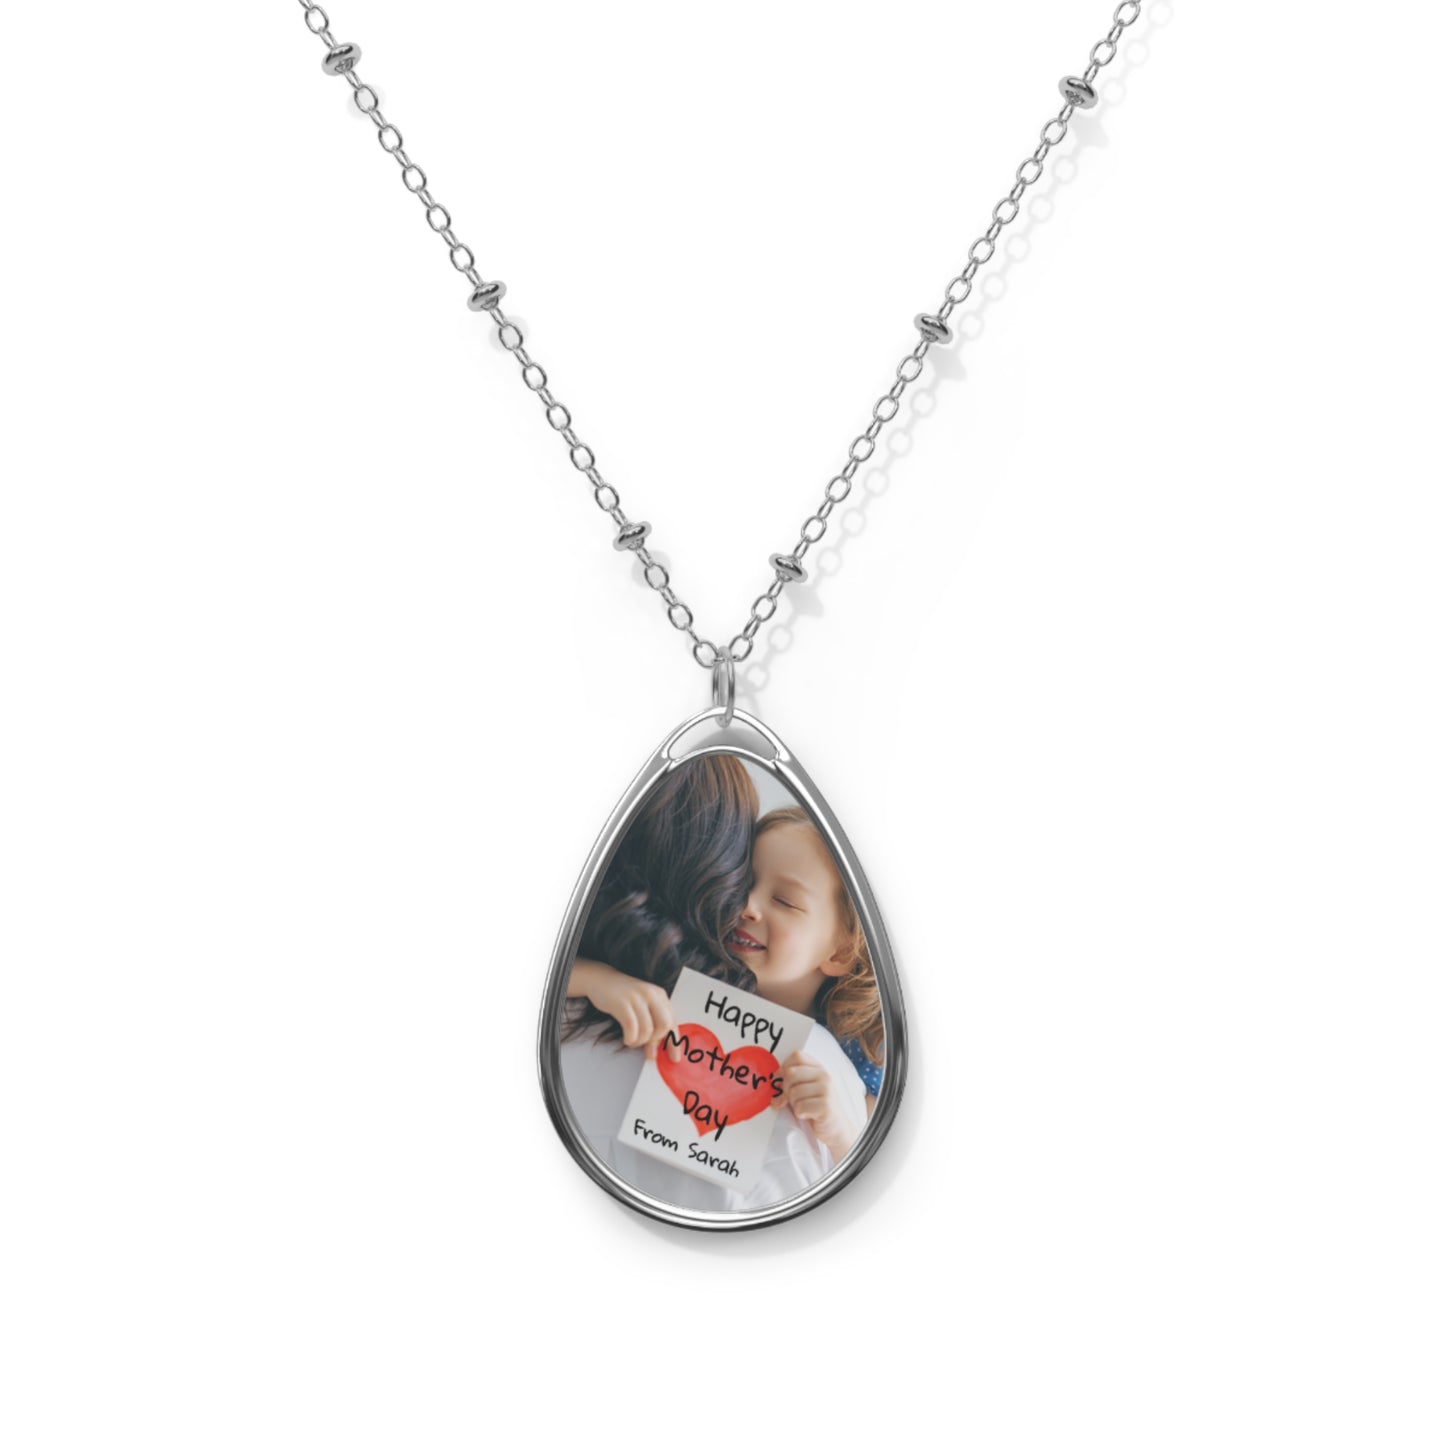 Personalized Oval Pendant Necklace - Mother's Day Special *SOLD OUT*